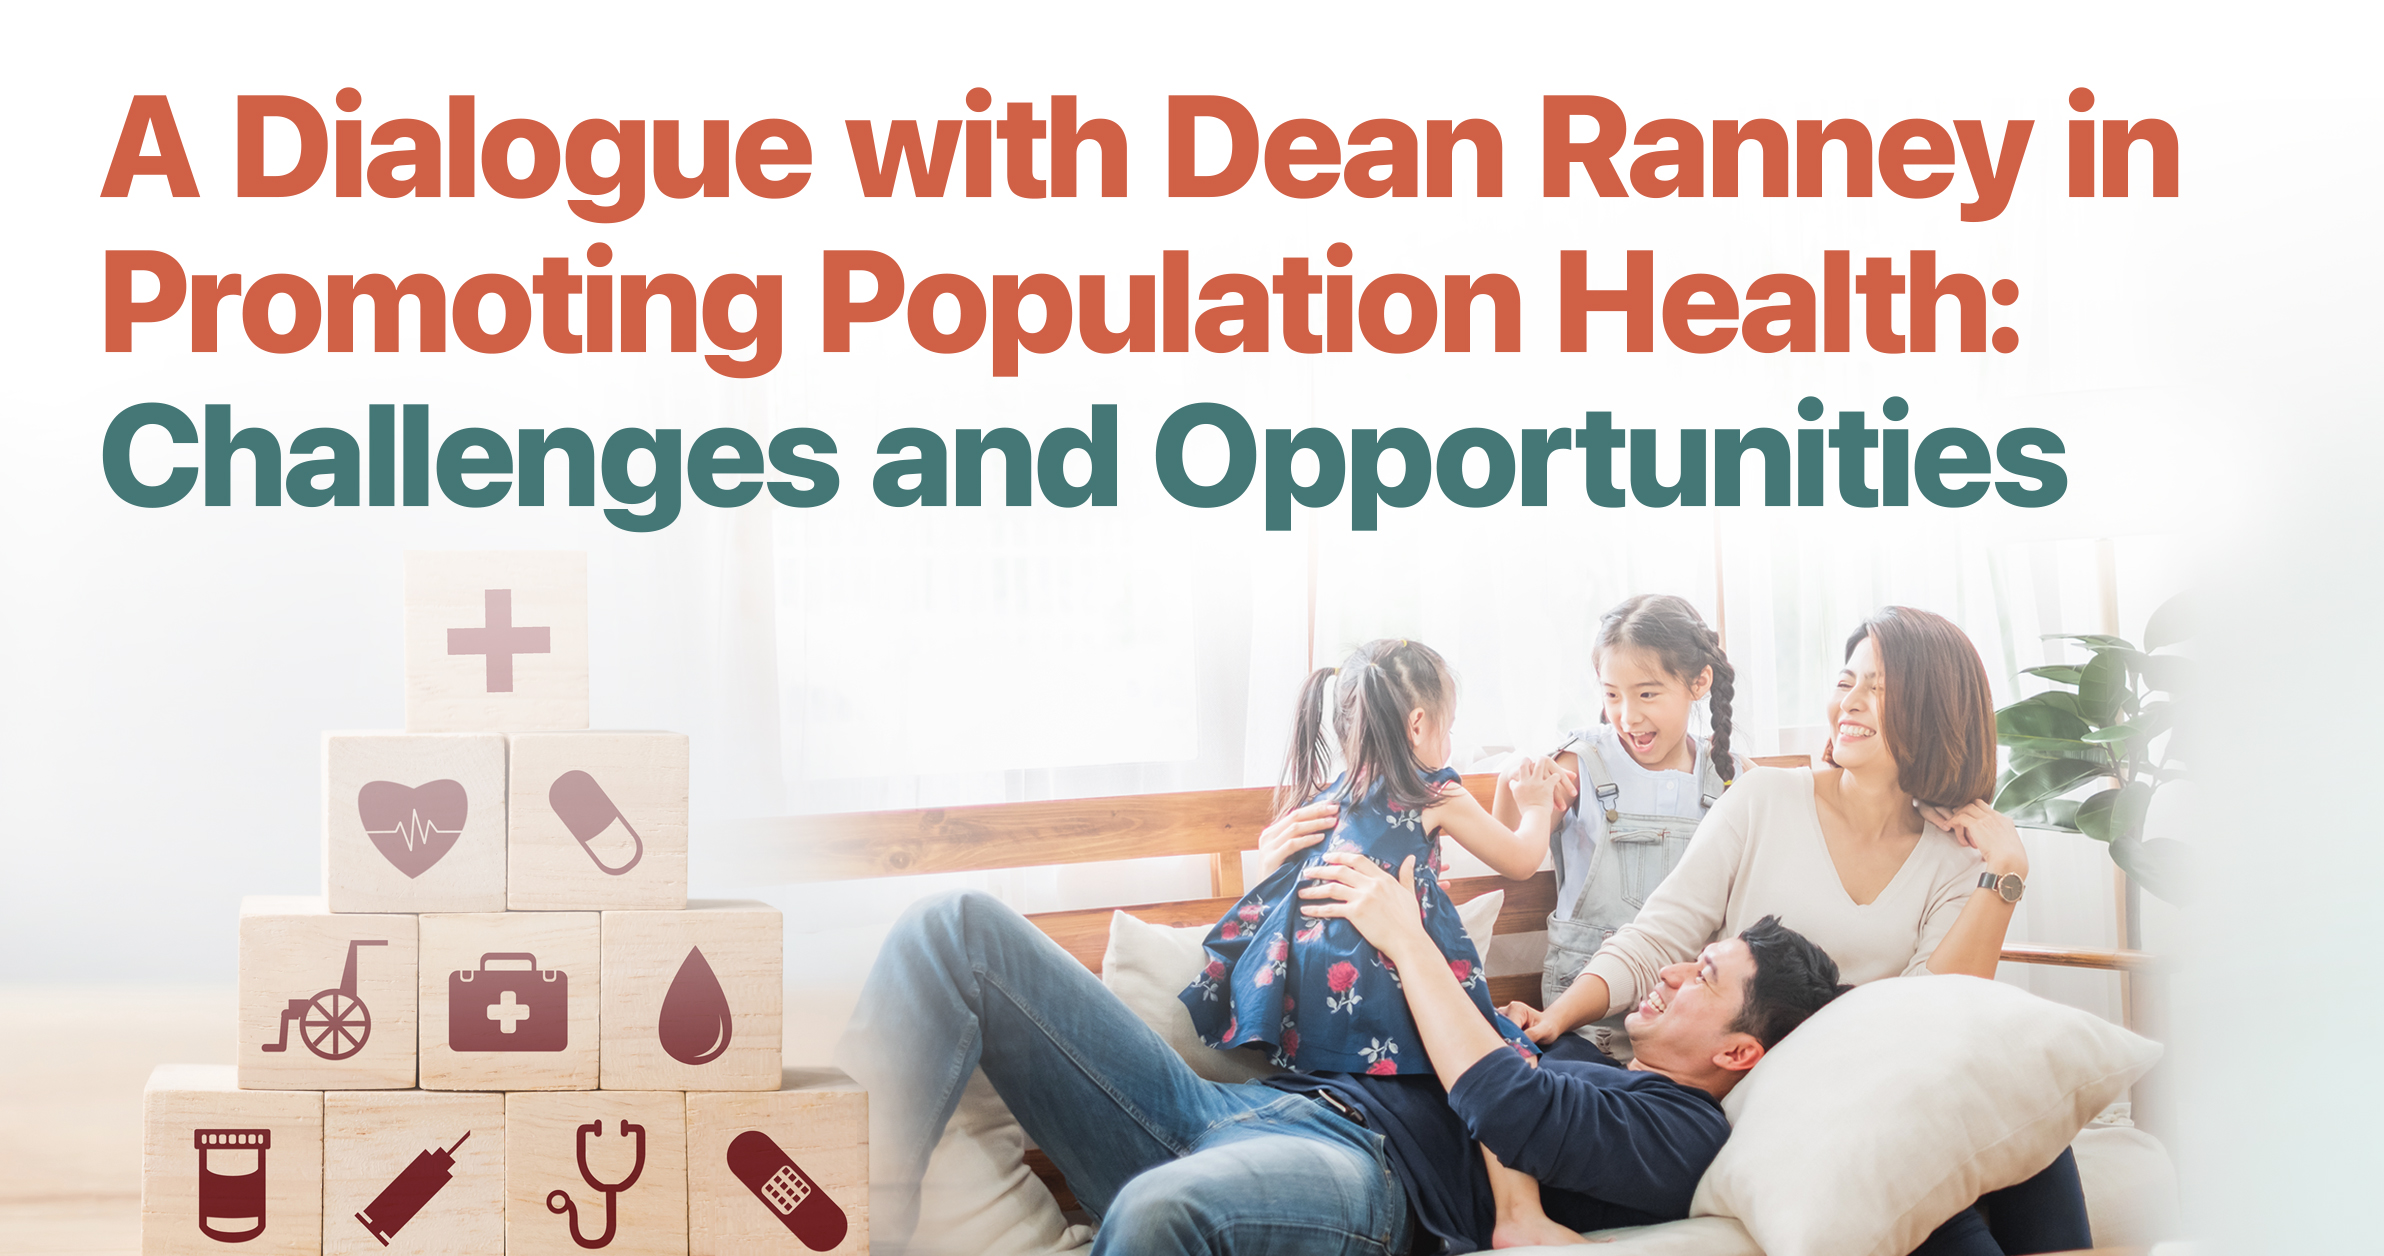 A Dialogue with Dean Ranney in Promoting Population Health: Challenges and Opportunities